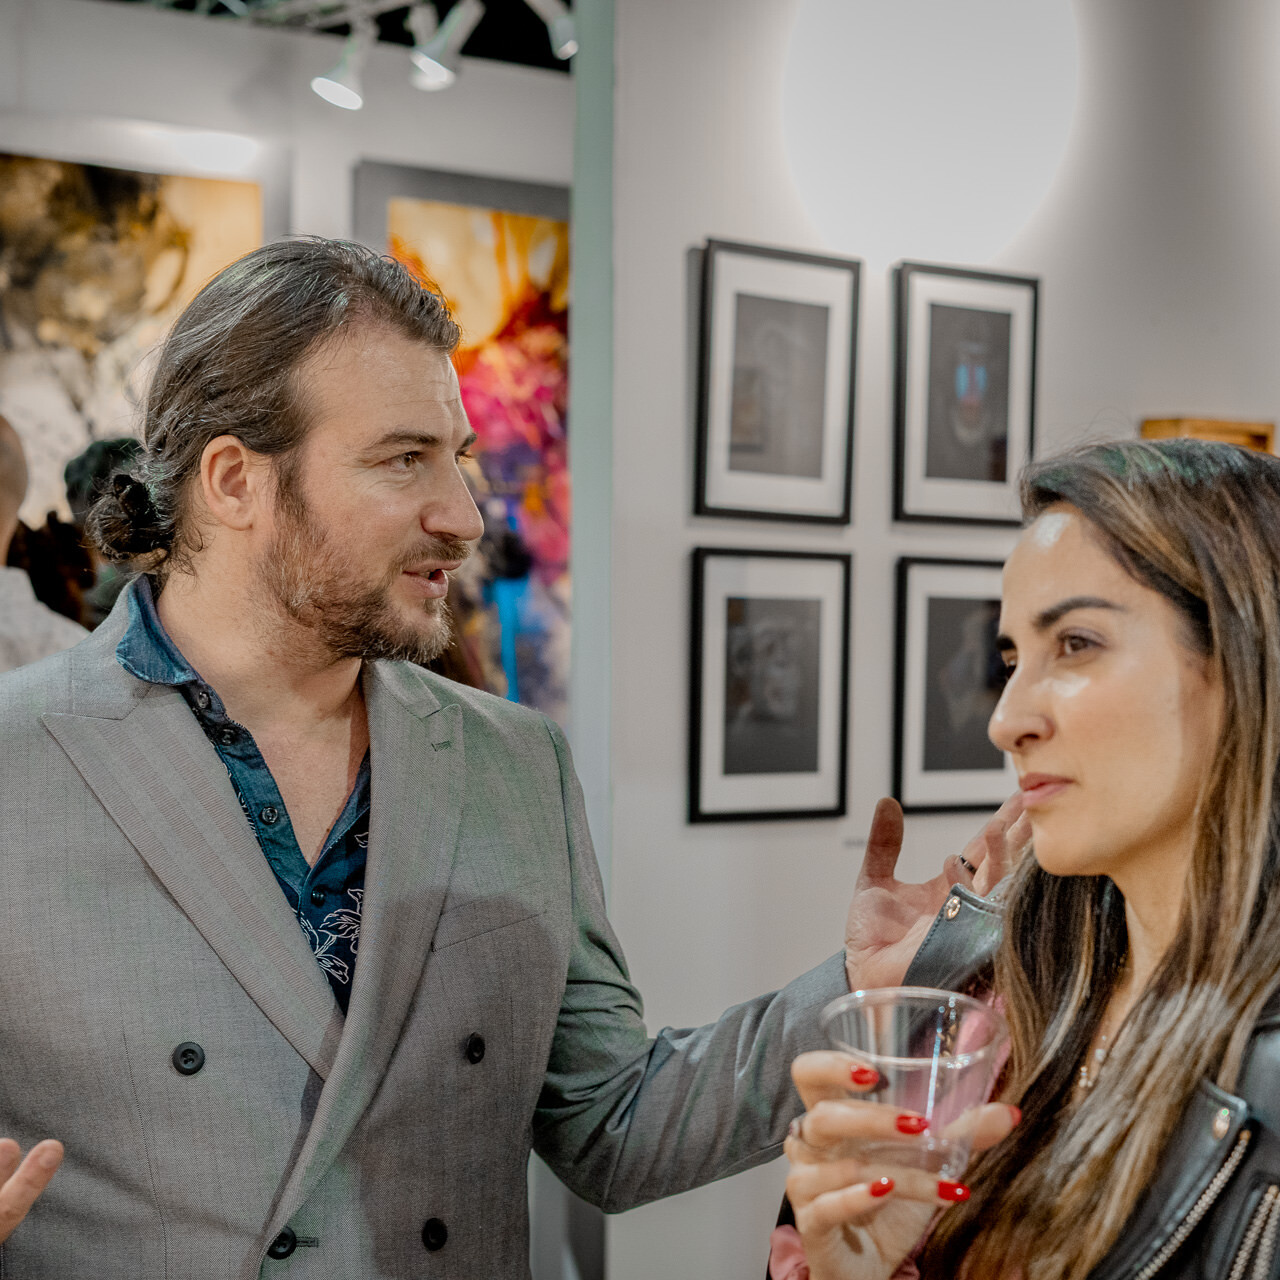 Artist Alex Righetto is seen engaging in a deep conversation with a visitor at the Spectrum Miami art fair, with his artwork in the backdrop.